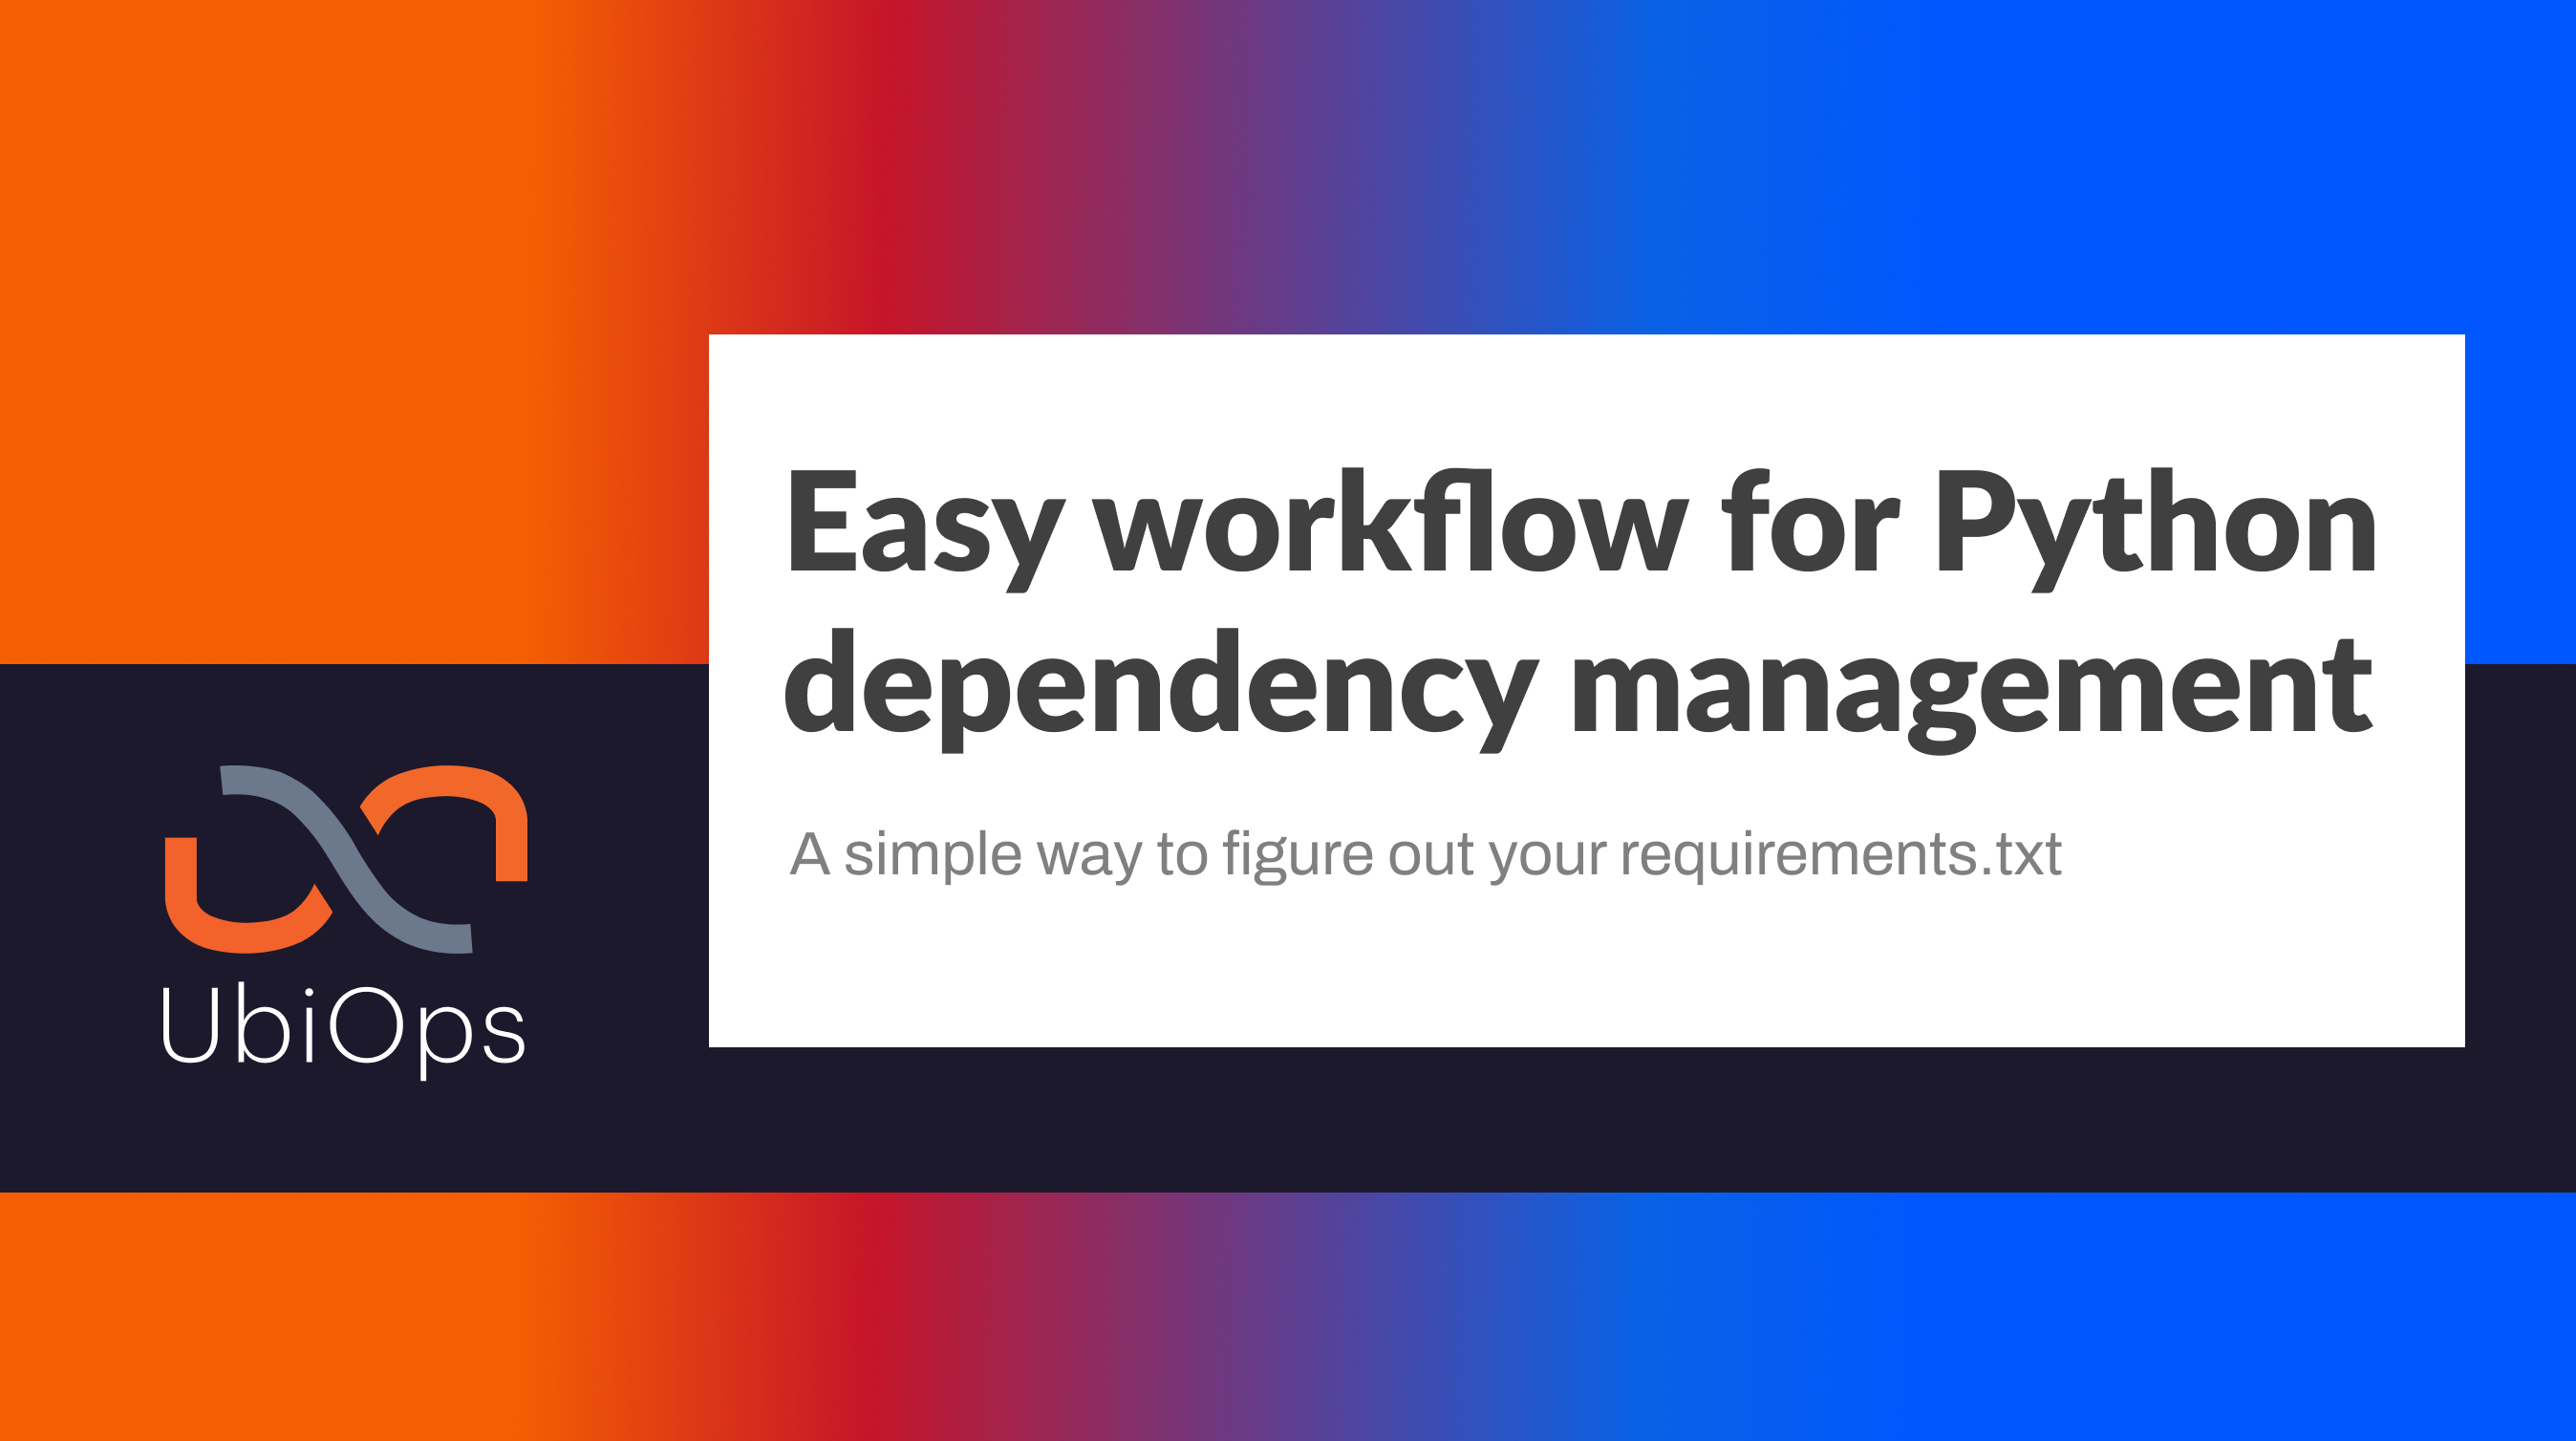 Easy workflow for Python dependency management (2)